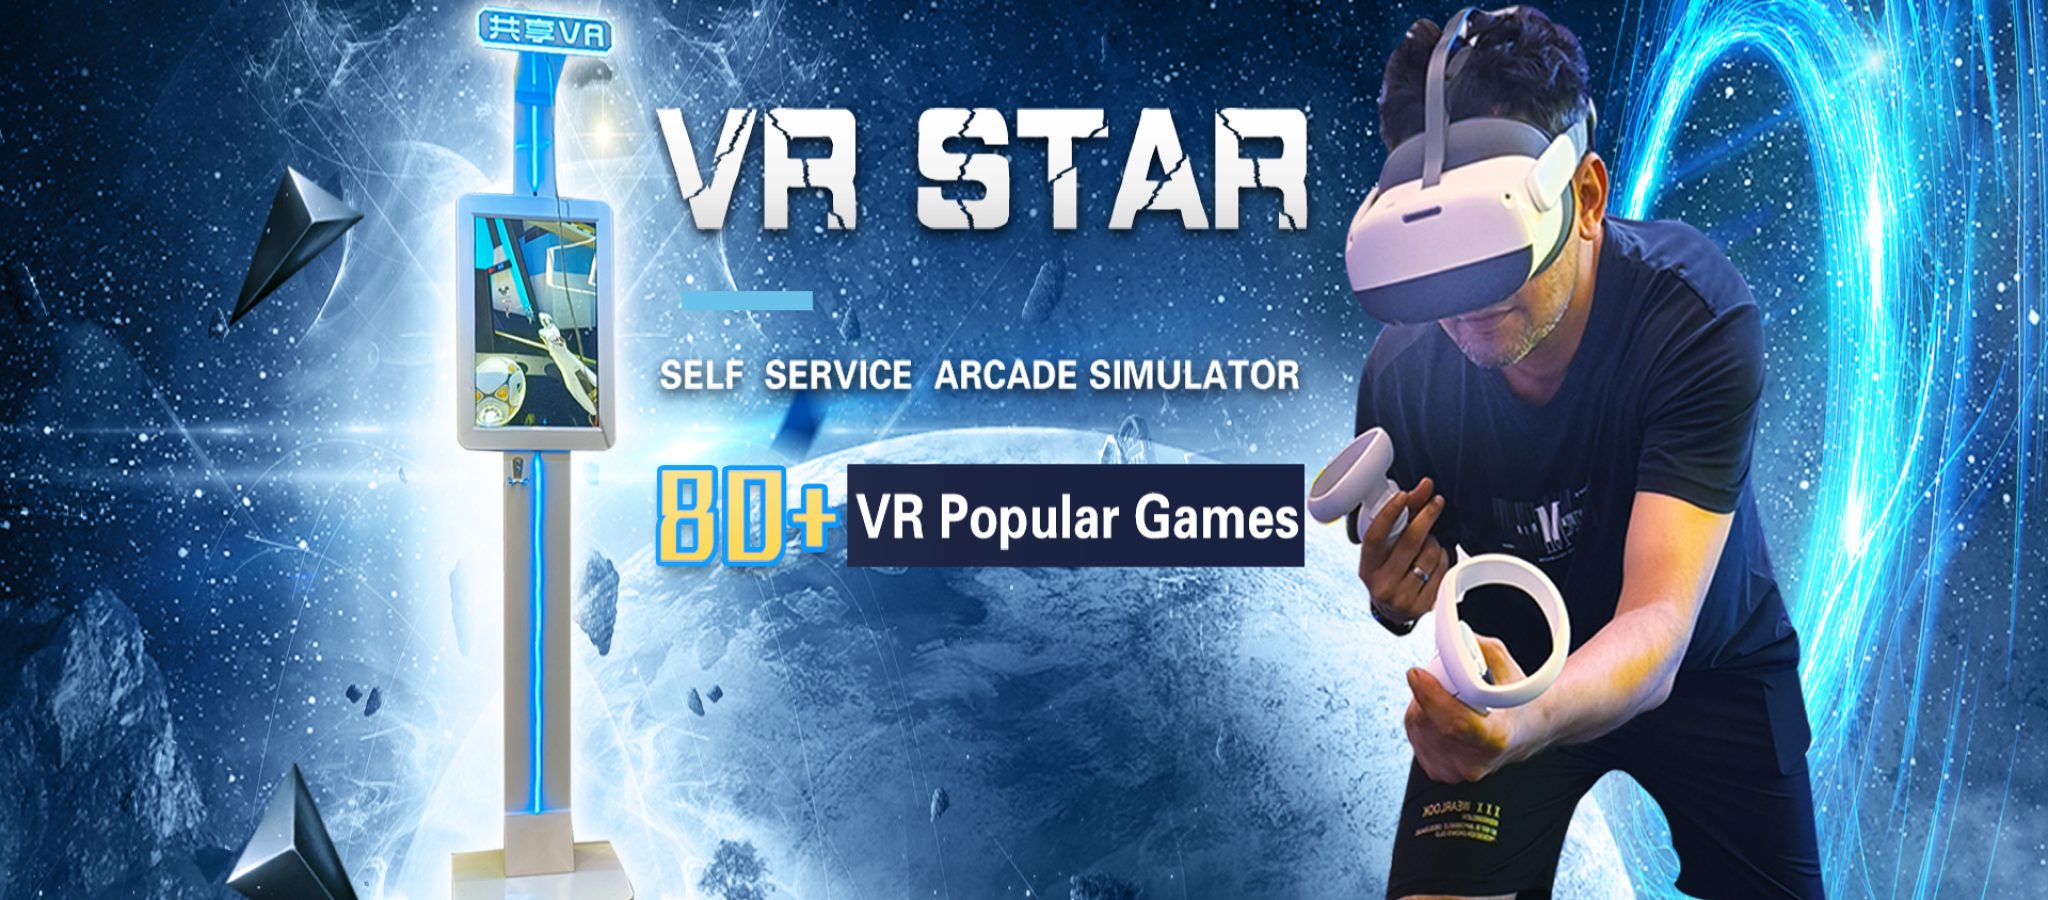 VR-star-is-a-moveable-VR-interactive-game-station